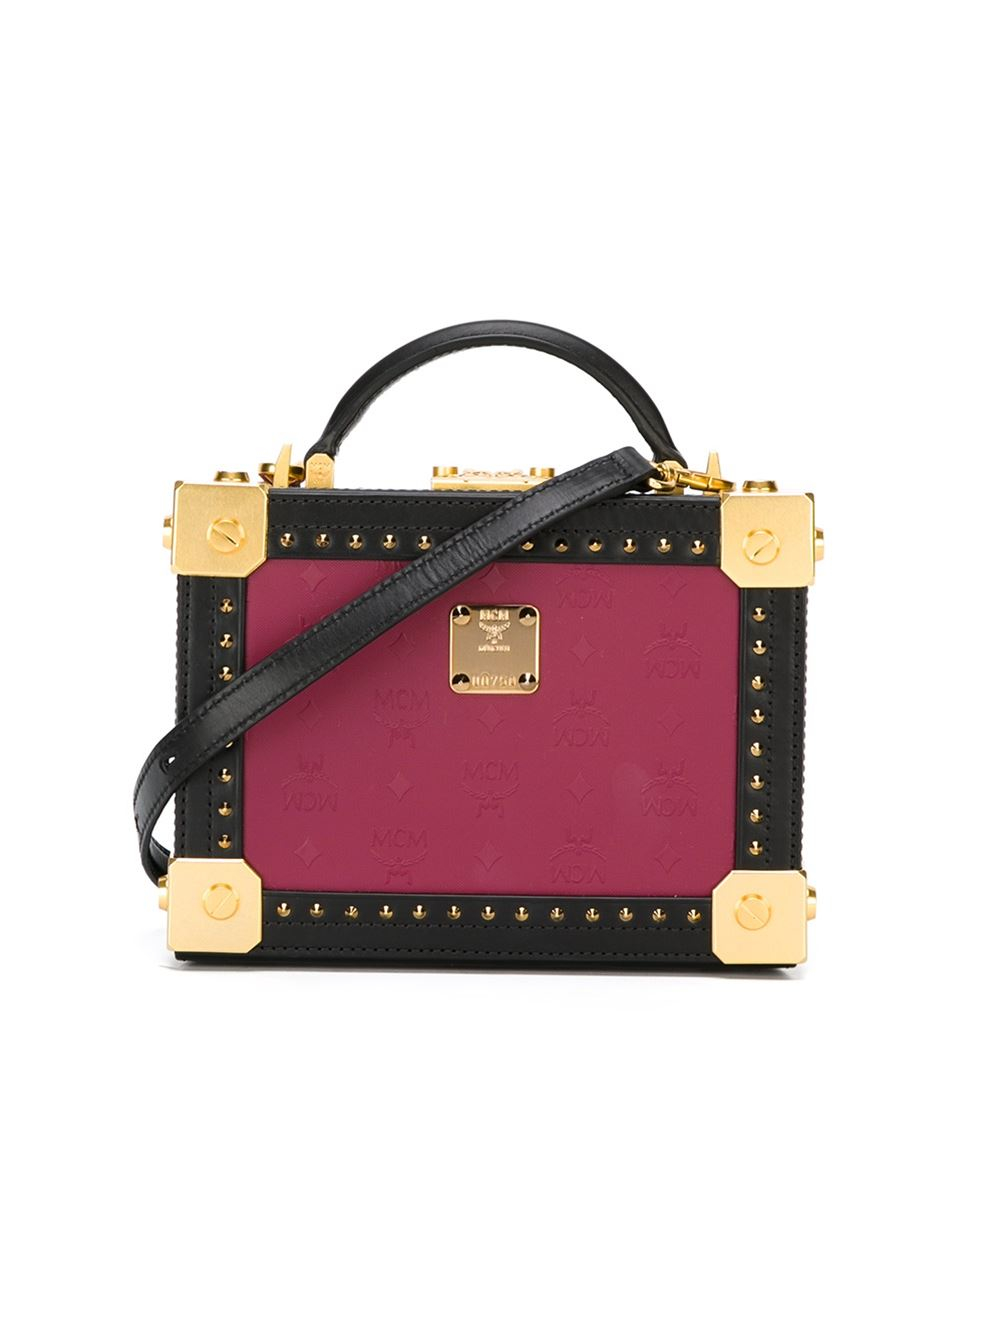 MCM Studded Box Cross Body Bag in Red - Lyst